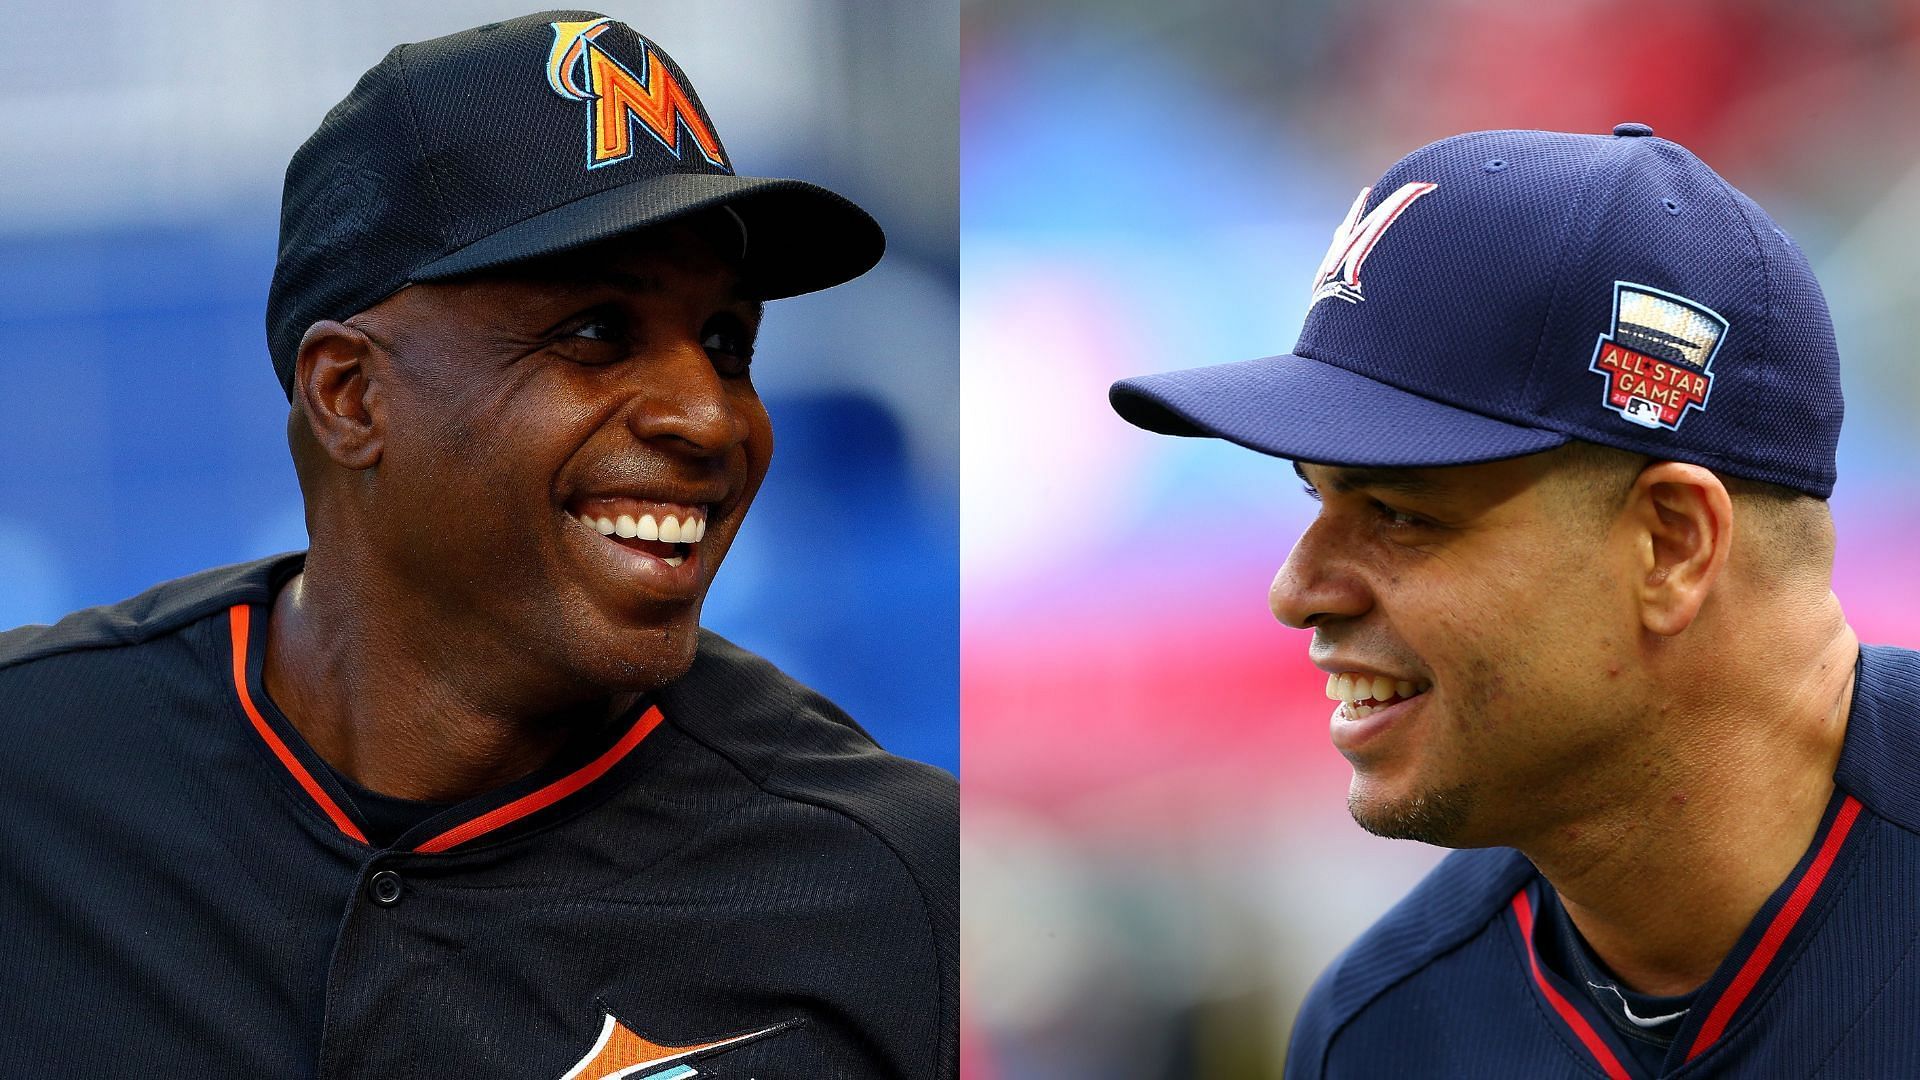 Former MLB star Aramis Ramirez thinks that Barry Bonds deserves to be in the Hall of Fame